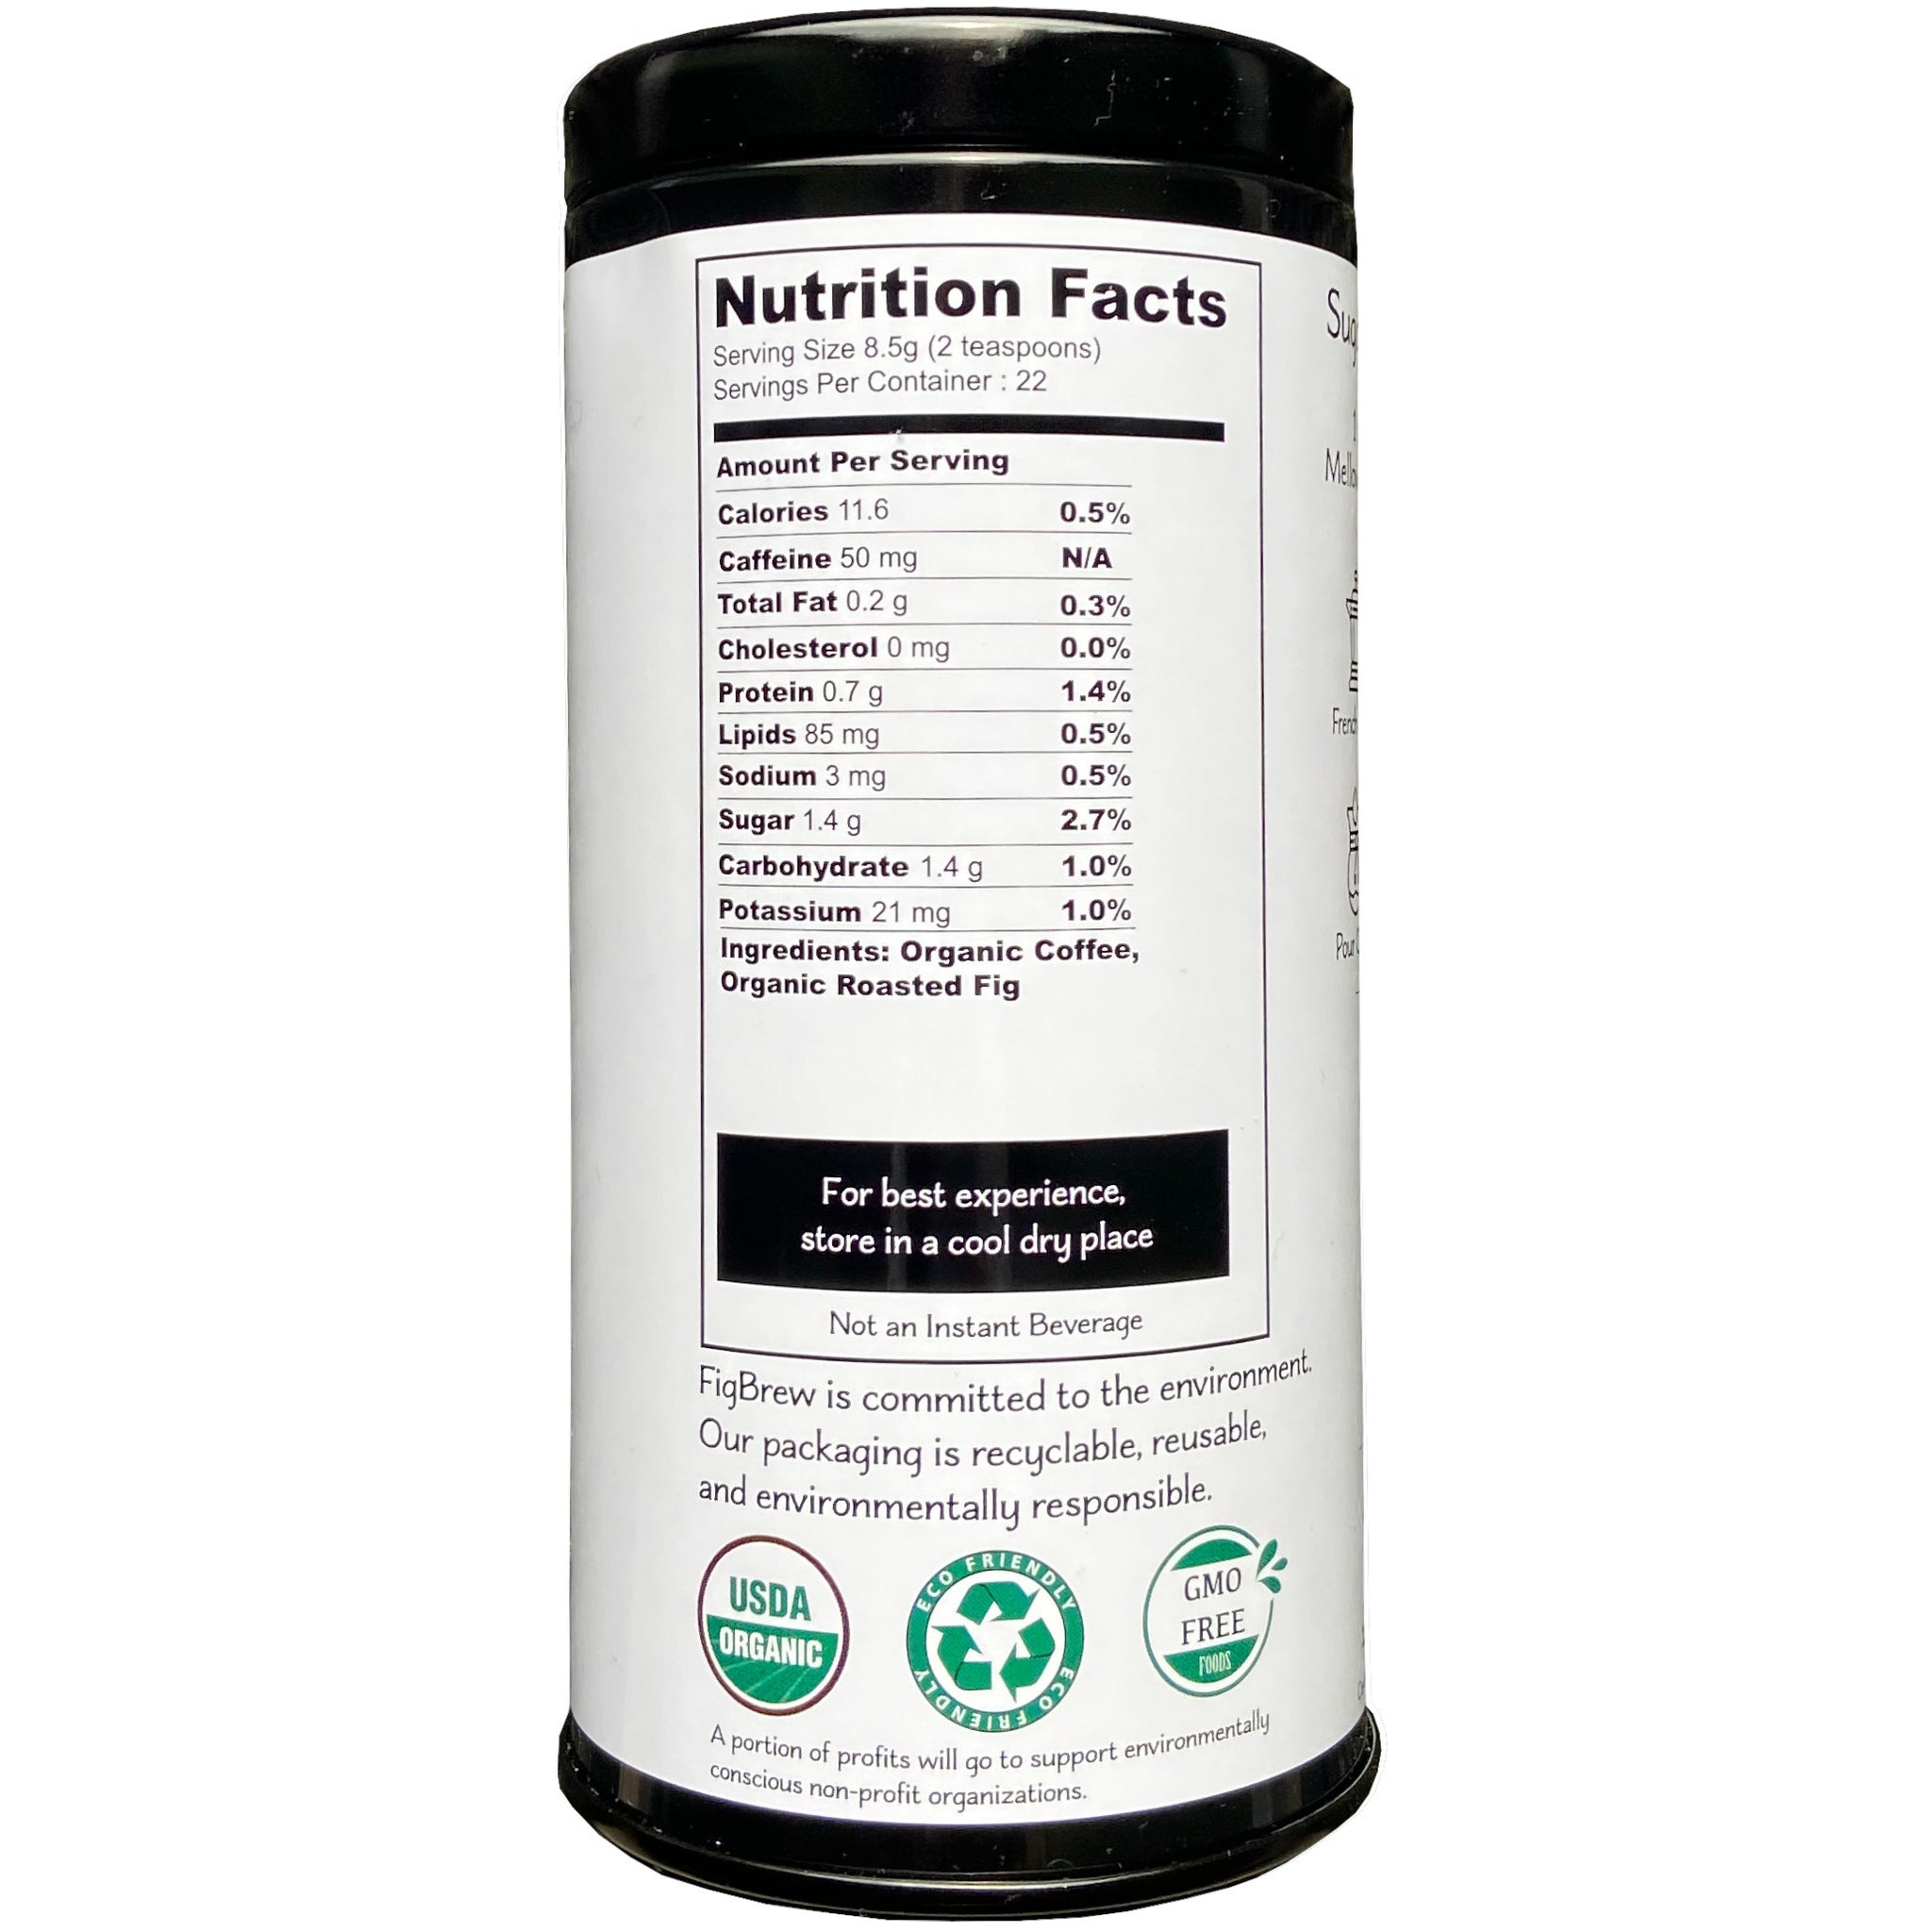 FigBrew Mellow Mix Nutrition facts